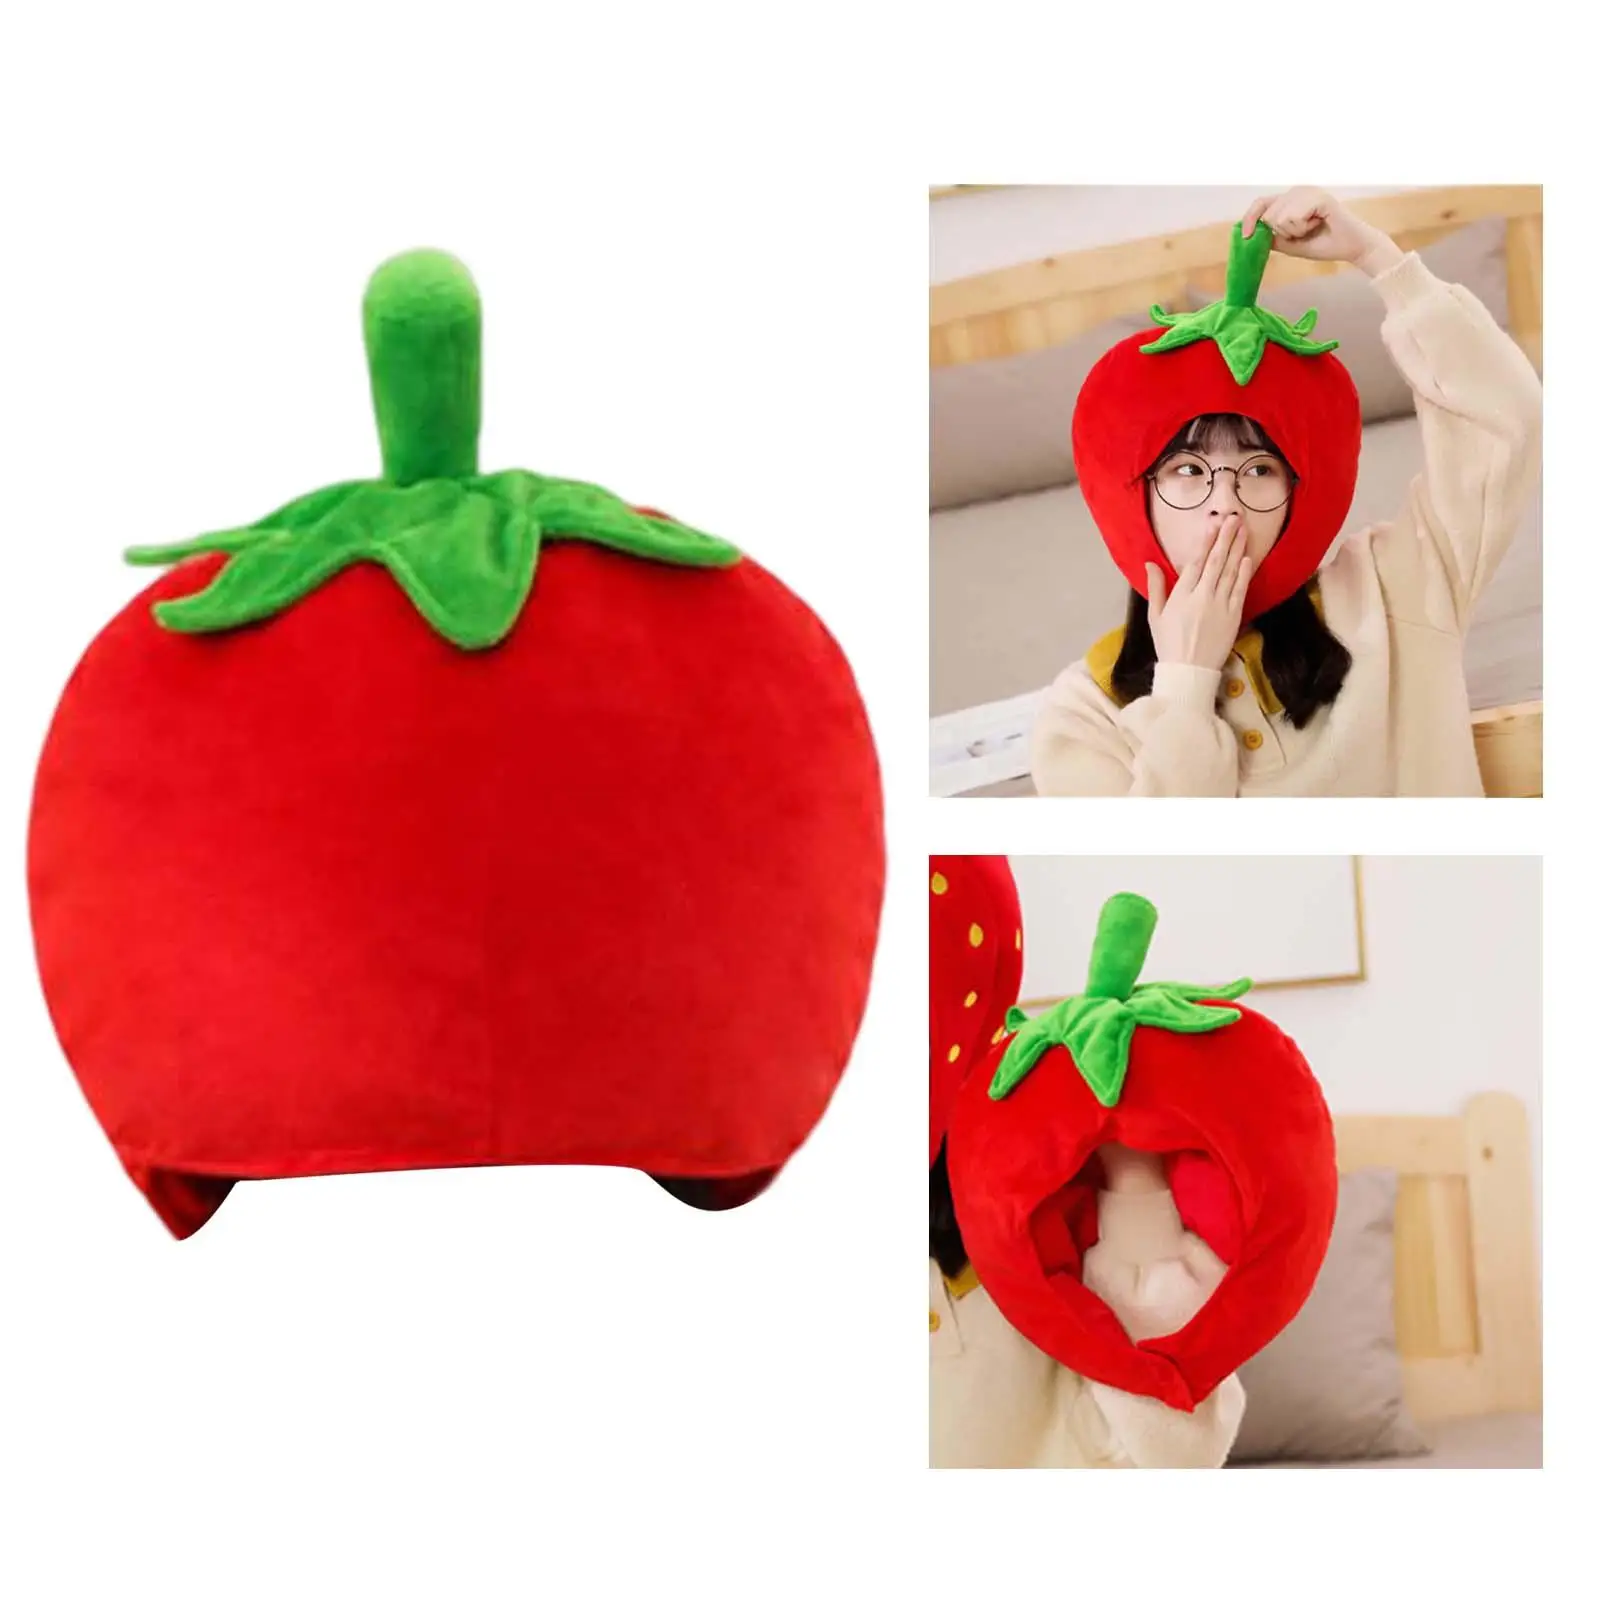 Cute Strawberry Headgear Sleeping Pillow Toy Costume Accessory Head Cover Hat for Christmas Halloween Party Photo Props Gifts